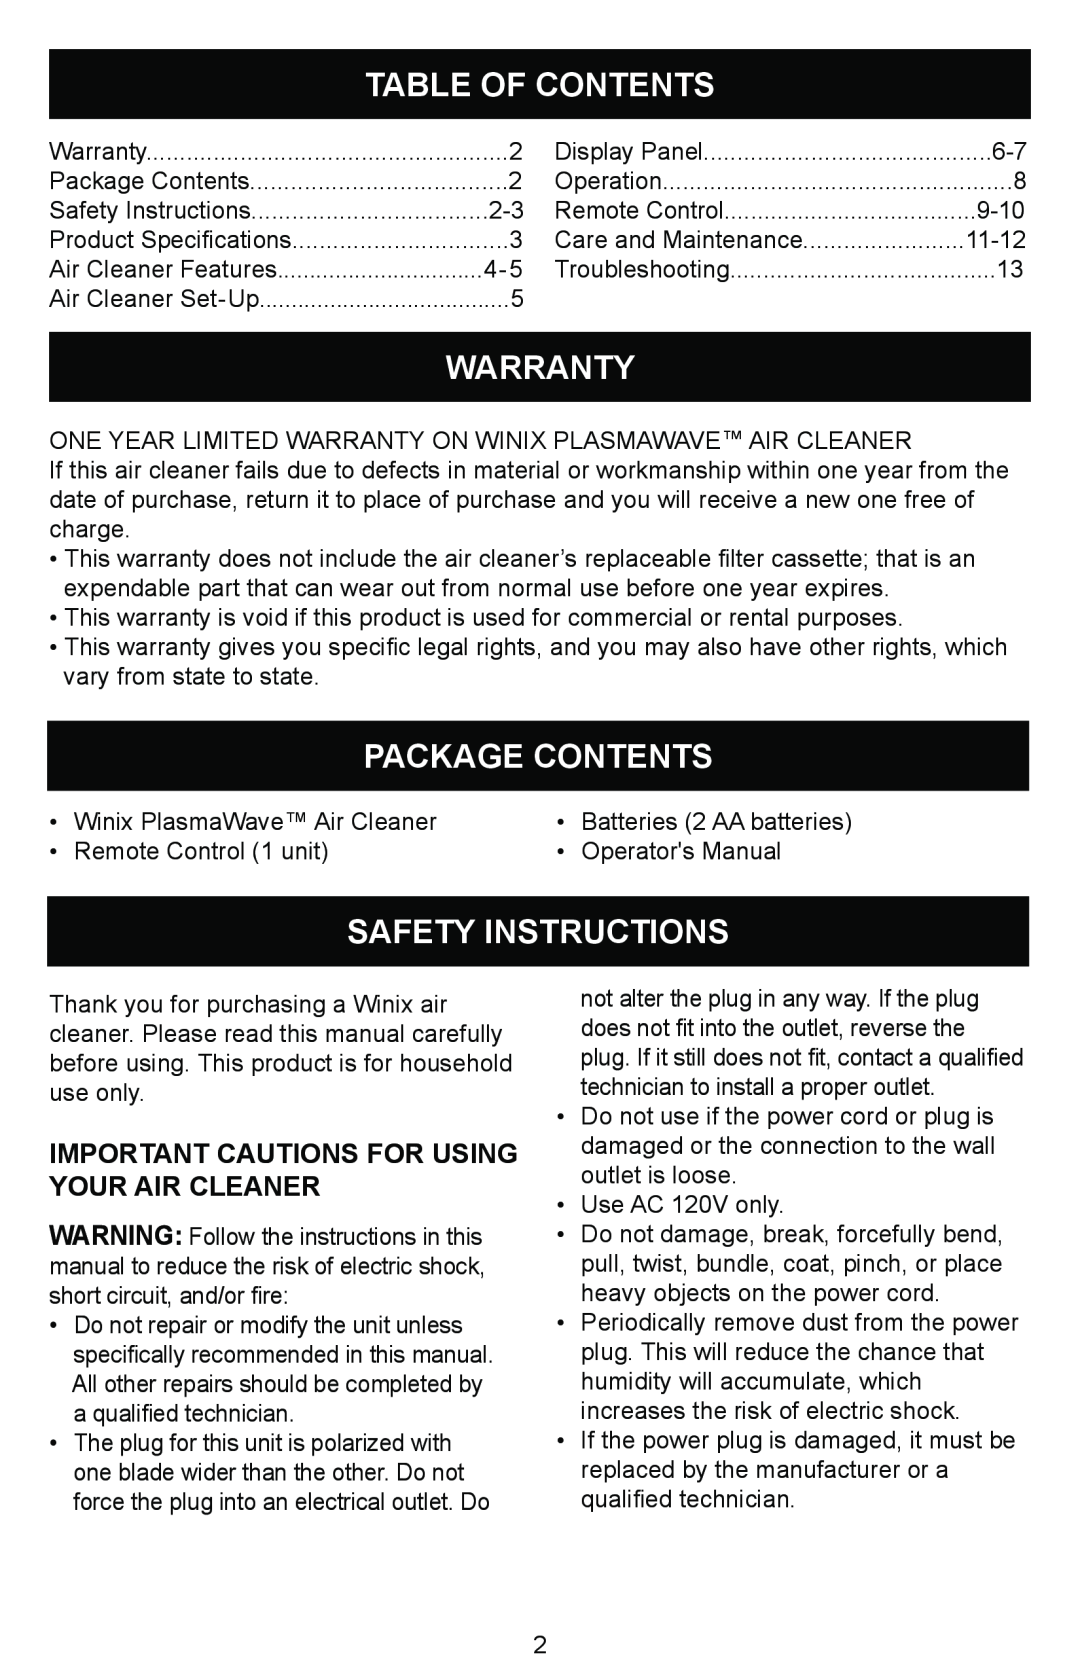 Winix Air Cleaner manual Table Of Contents, Warranty, Package Contents, Safety Instructions 